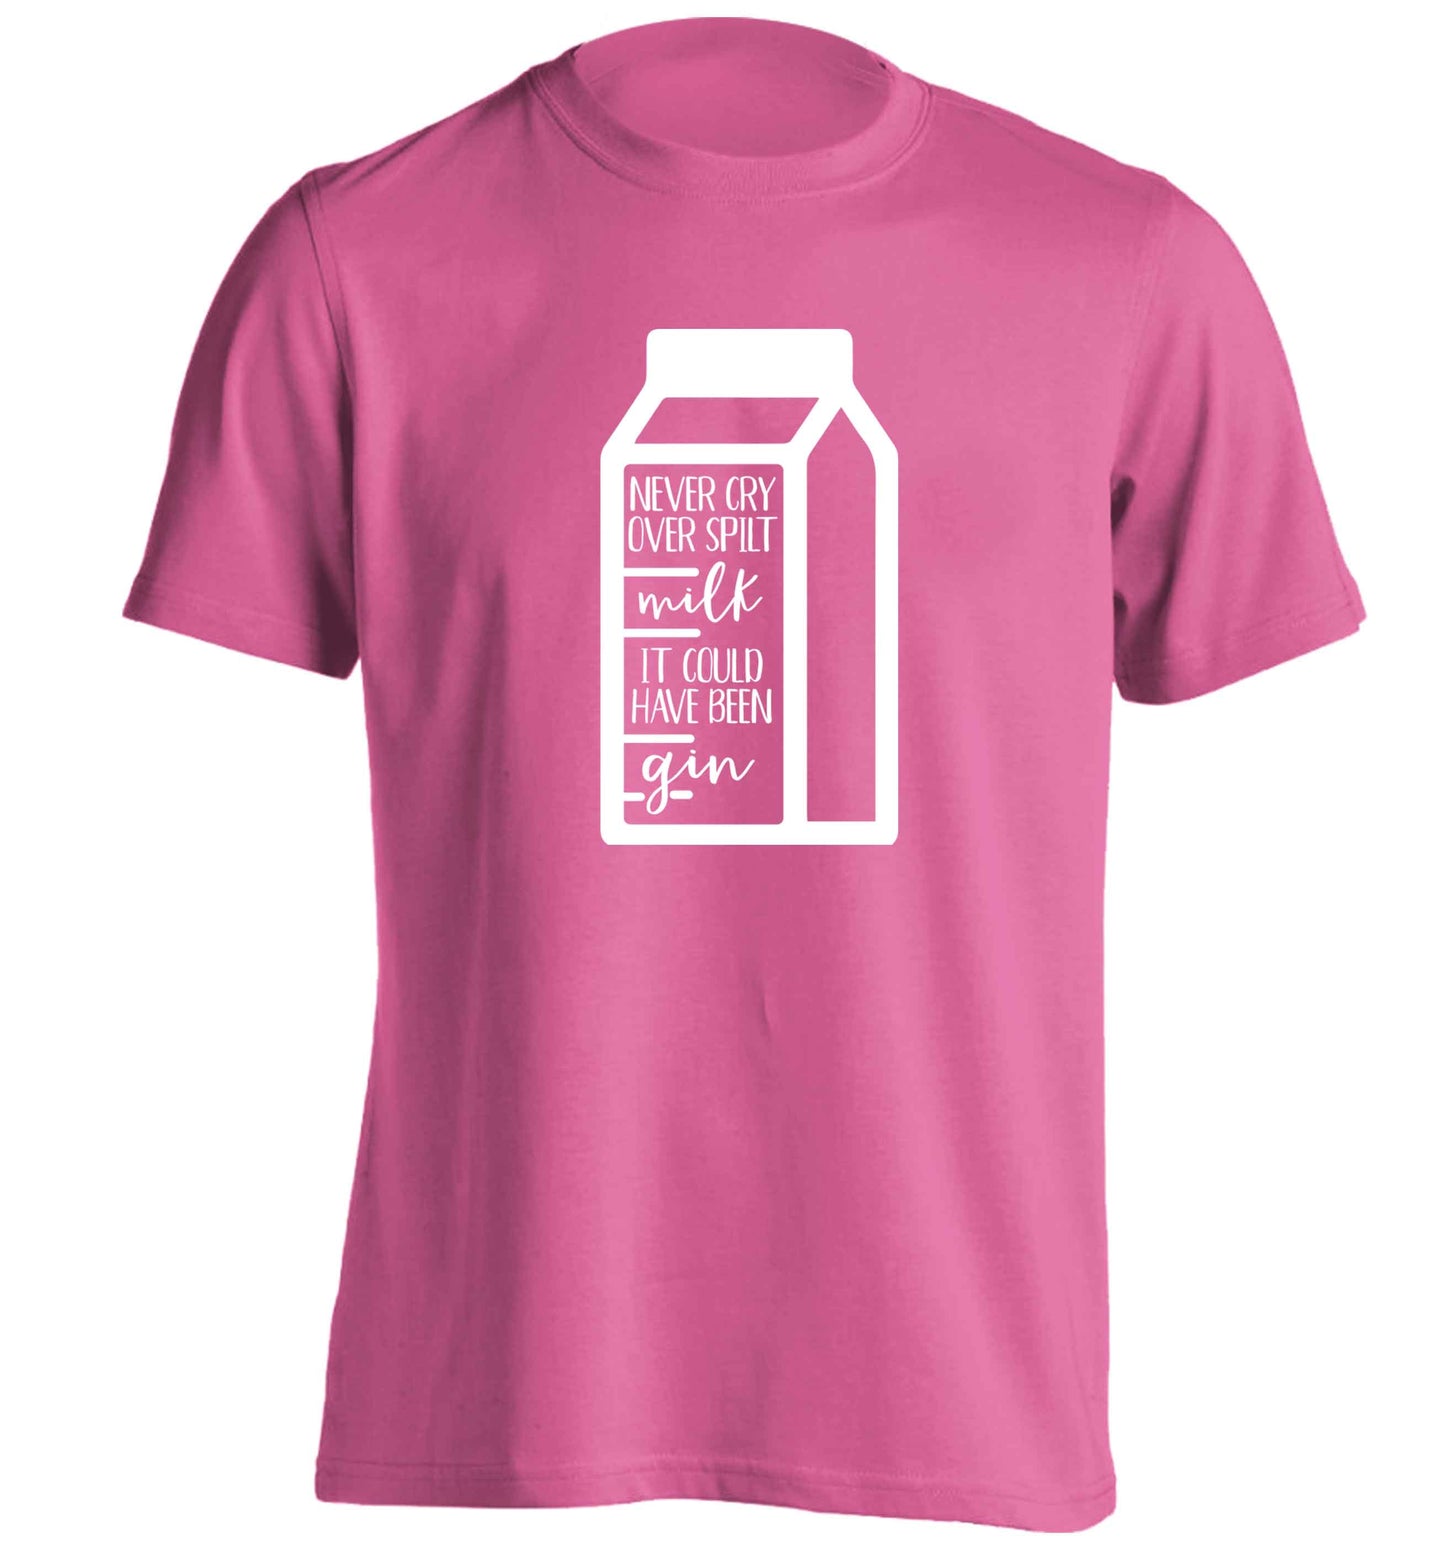 Never cry over spilt milk, it could have been gin adults unisex pink Tshirt 2XL